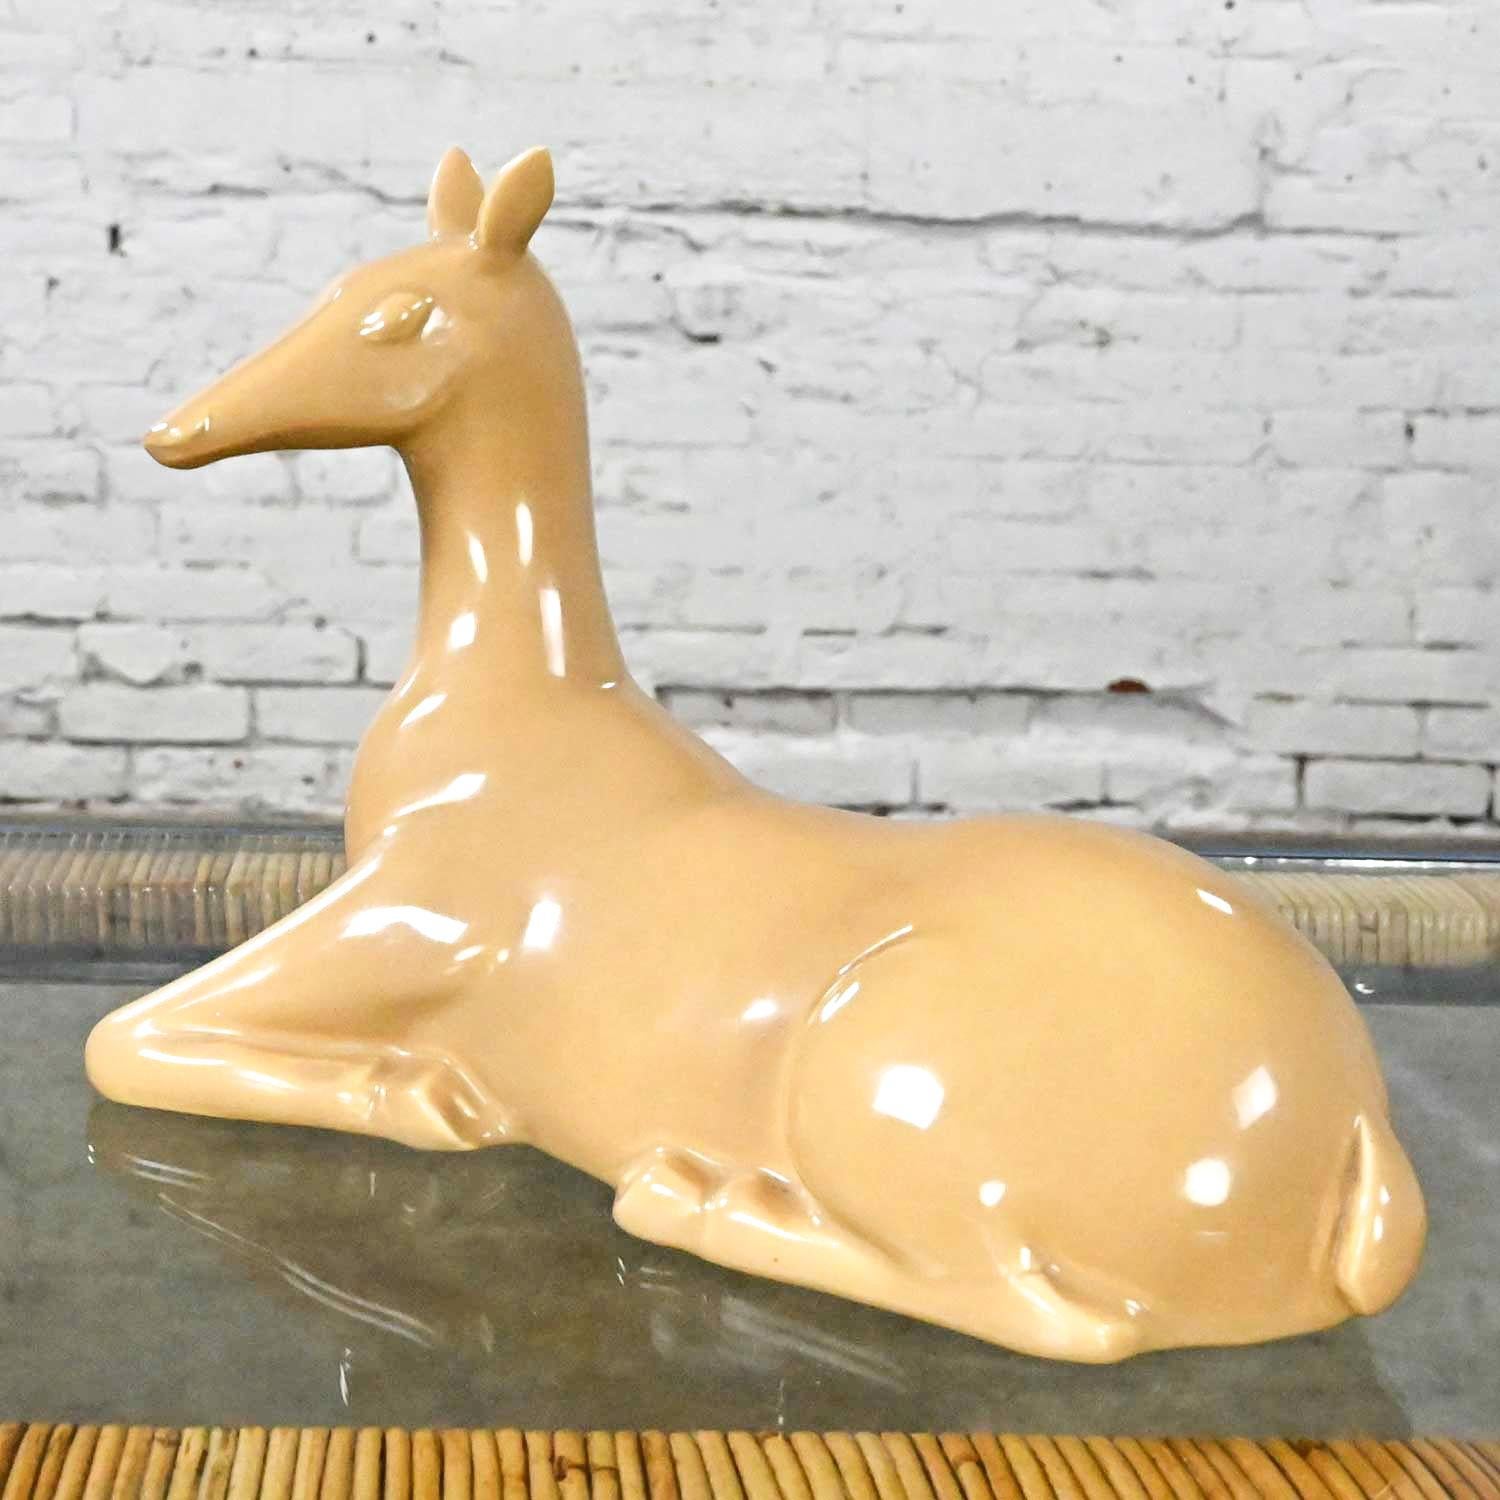 Lovely vintage mid-century modern to modern and Art Deco Revival caramel colored ceramic deer by Jaru California Pottery 1975. Beautiful condition, keeping in mind that this is vintage and not new so will have signs of use and wear. Please see